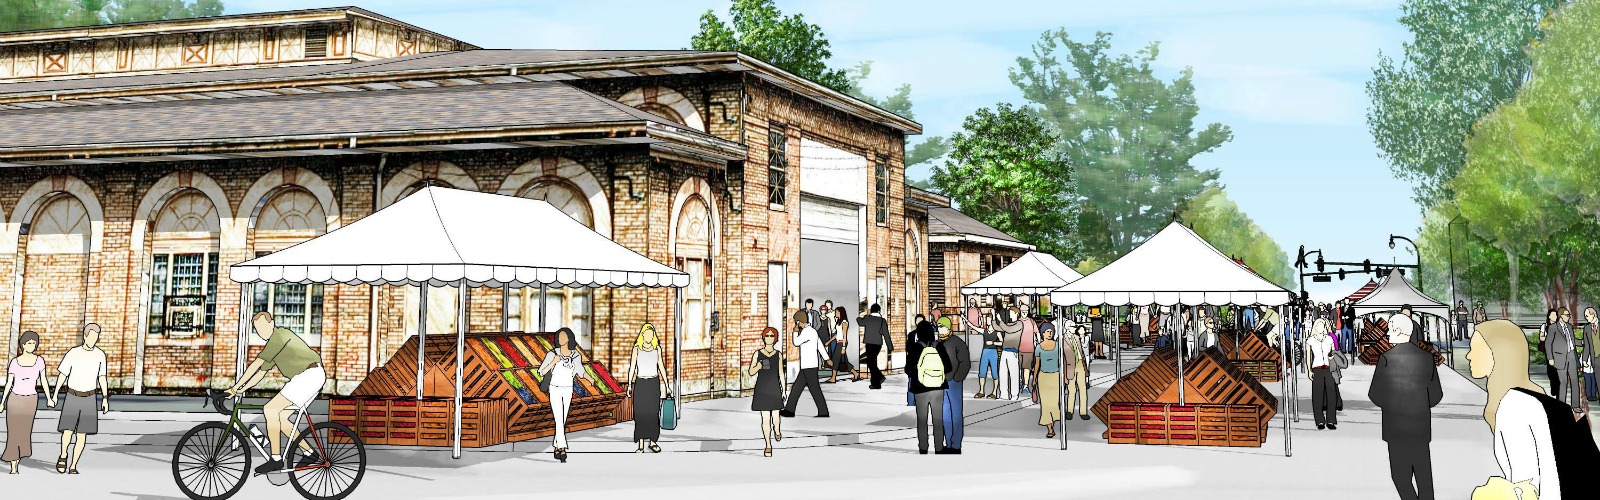 Rendering of a community market in Victory Park